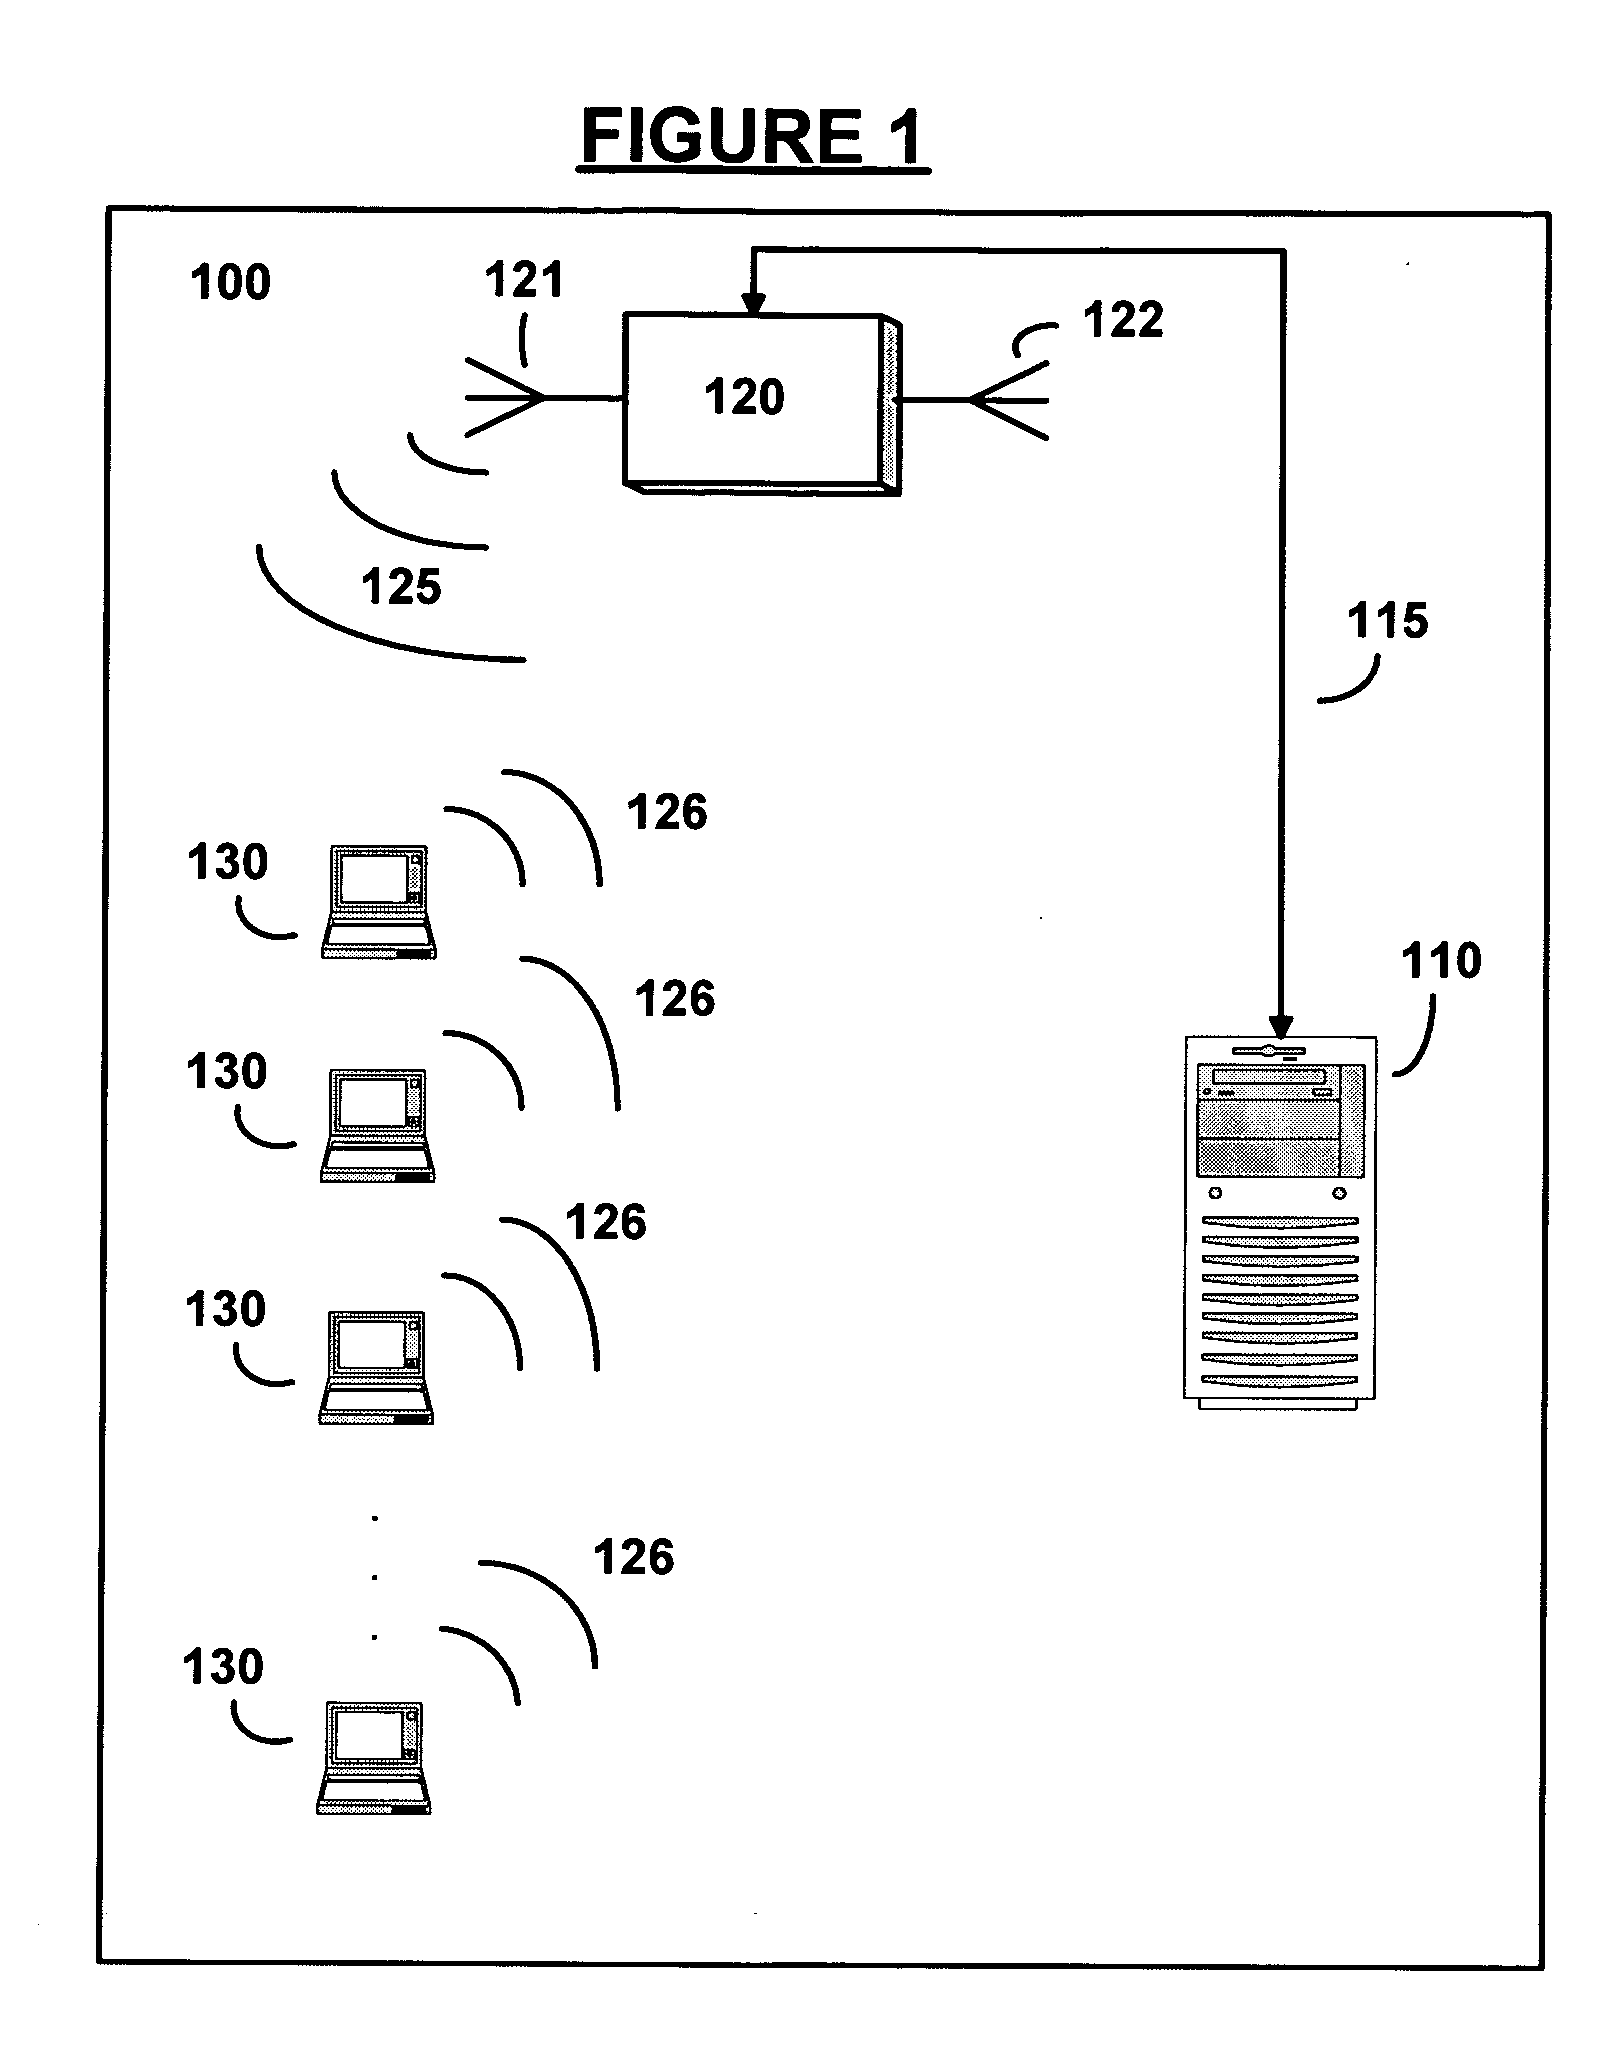 Systems and methods for wake-on-LAN for wireless LAN devices